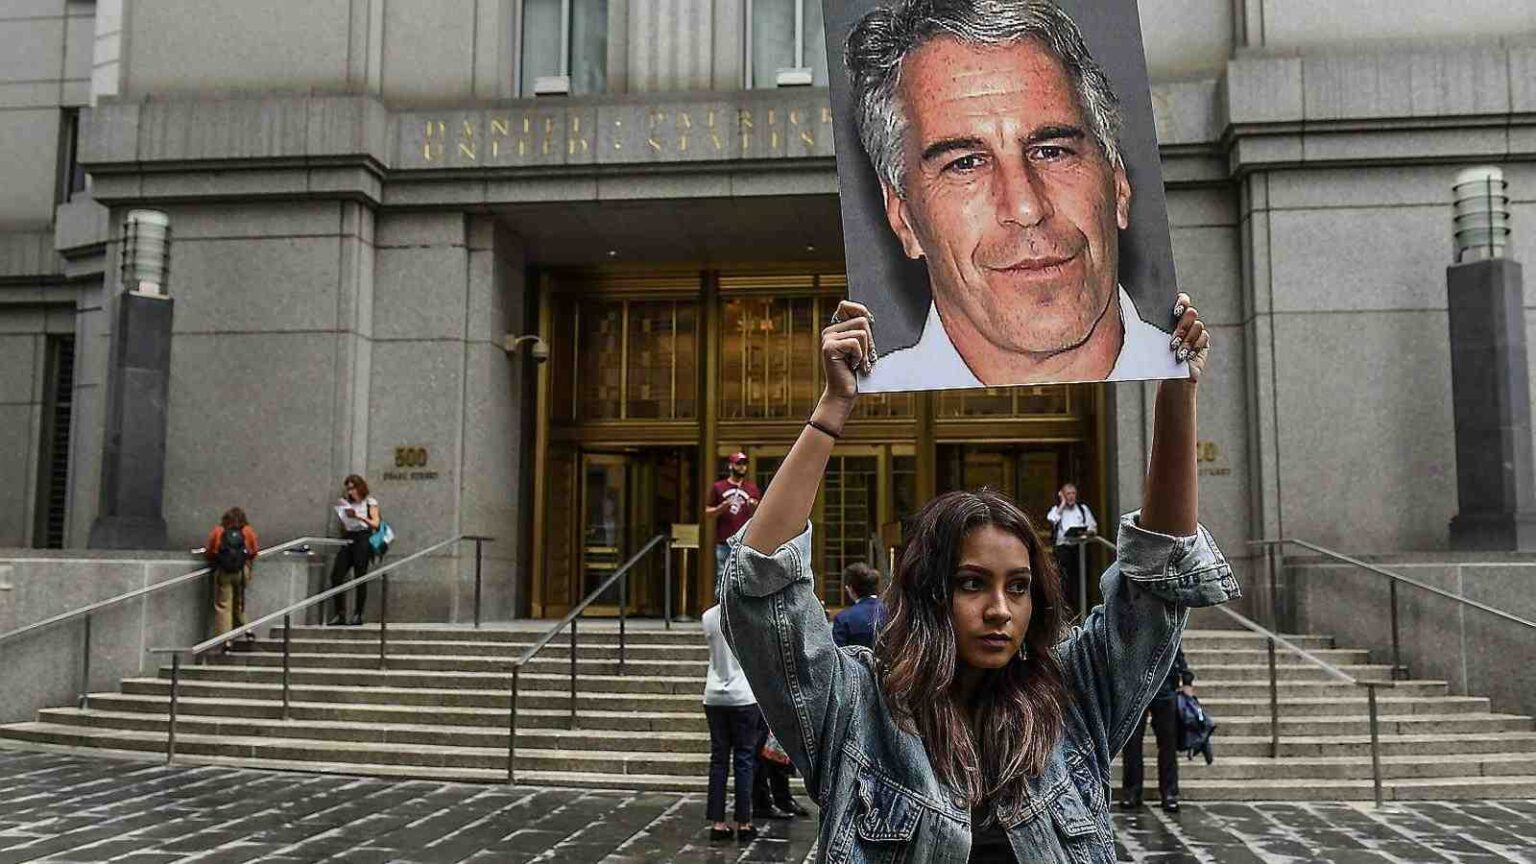 Dive into the 'Island Boys Jeffrey Epstein' narrative web, a scandalous conjunction transformed by AI into a tantalizingly faux discourse. Truth or digital illusion? Find out now!